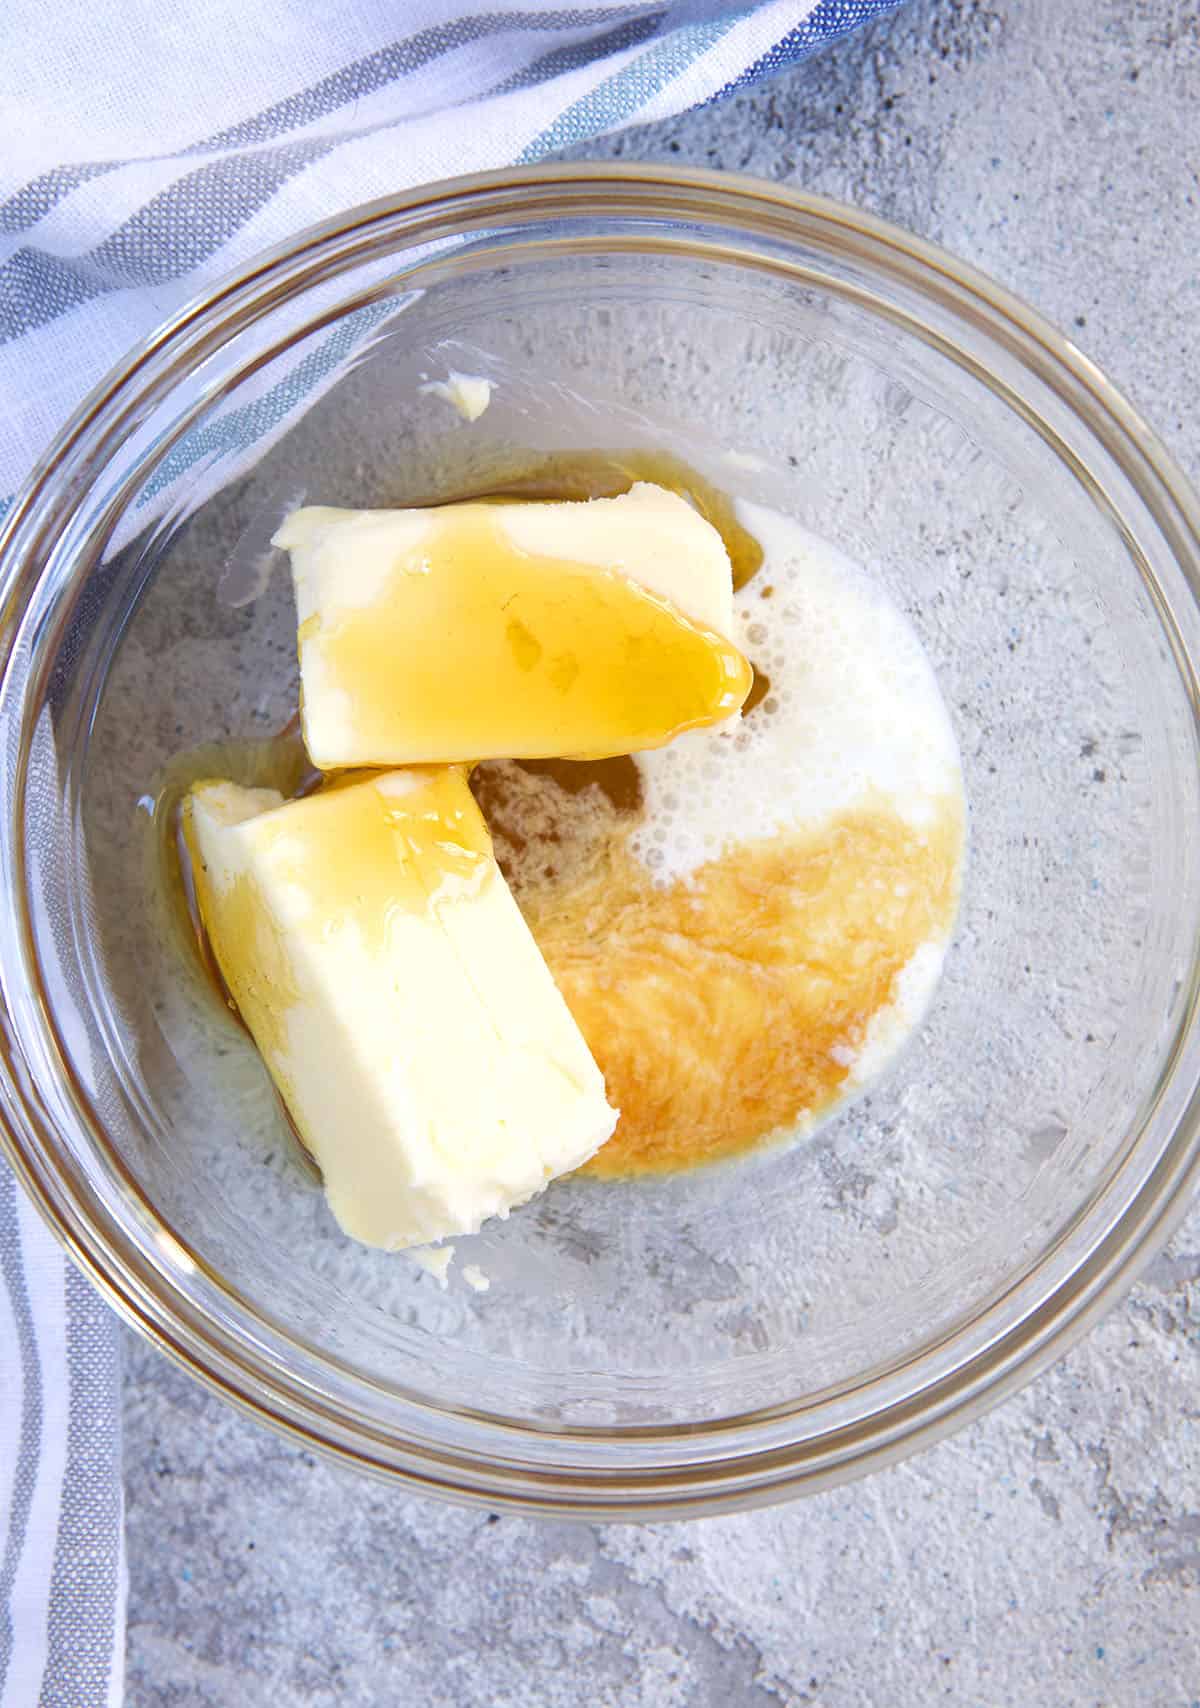 The ingredients for honey butter are placed in a glass bowl. 